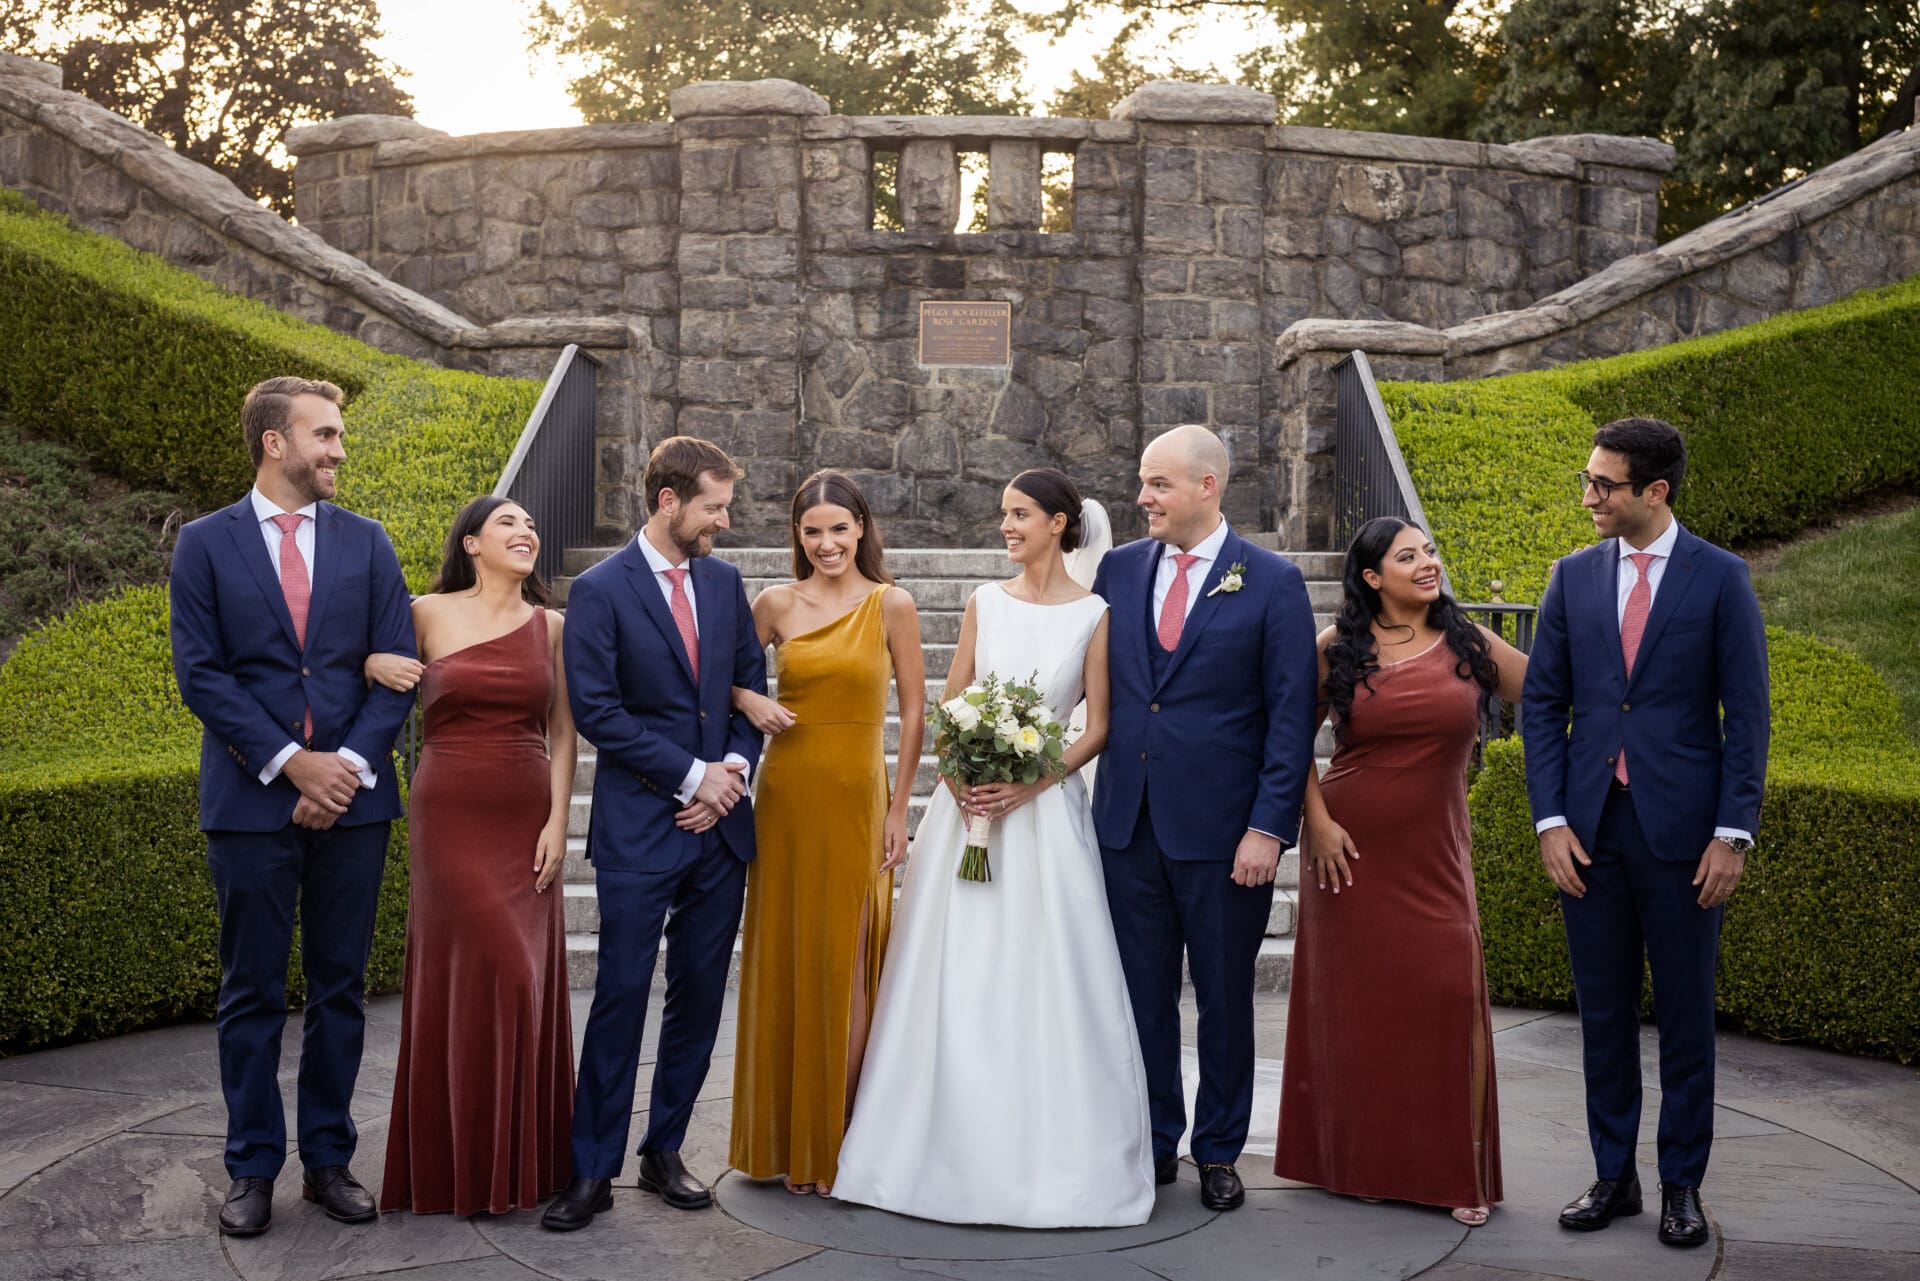 A wedding party poses in front of the stairs in the Rose Garden at the New York Botanical Gardens in the Bronx NY